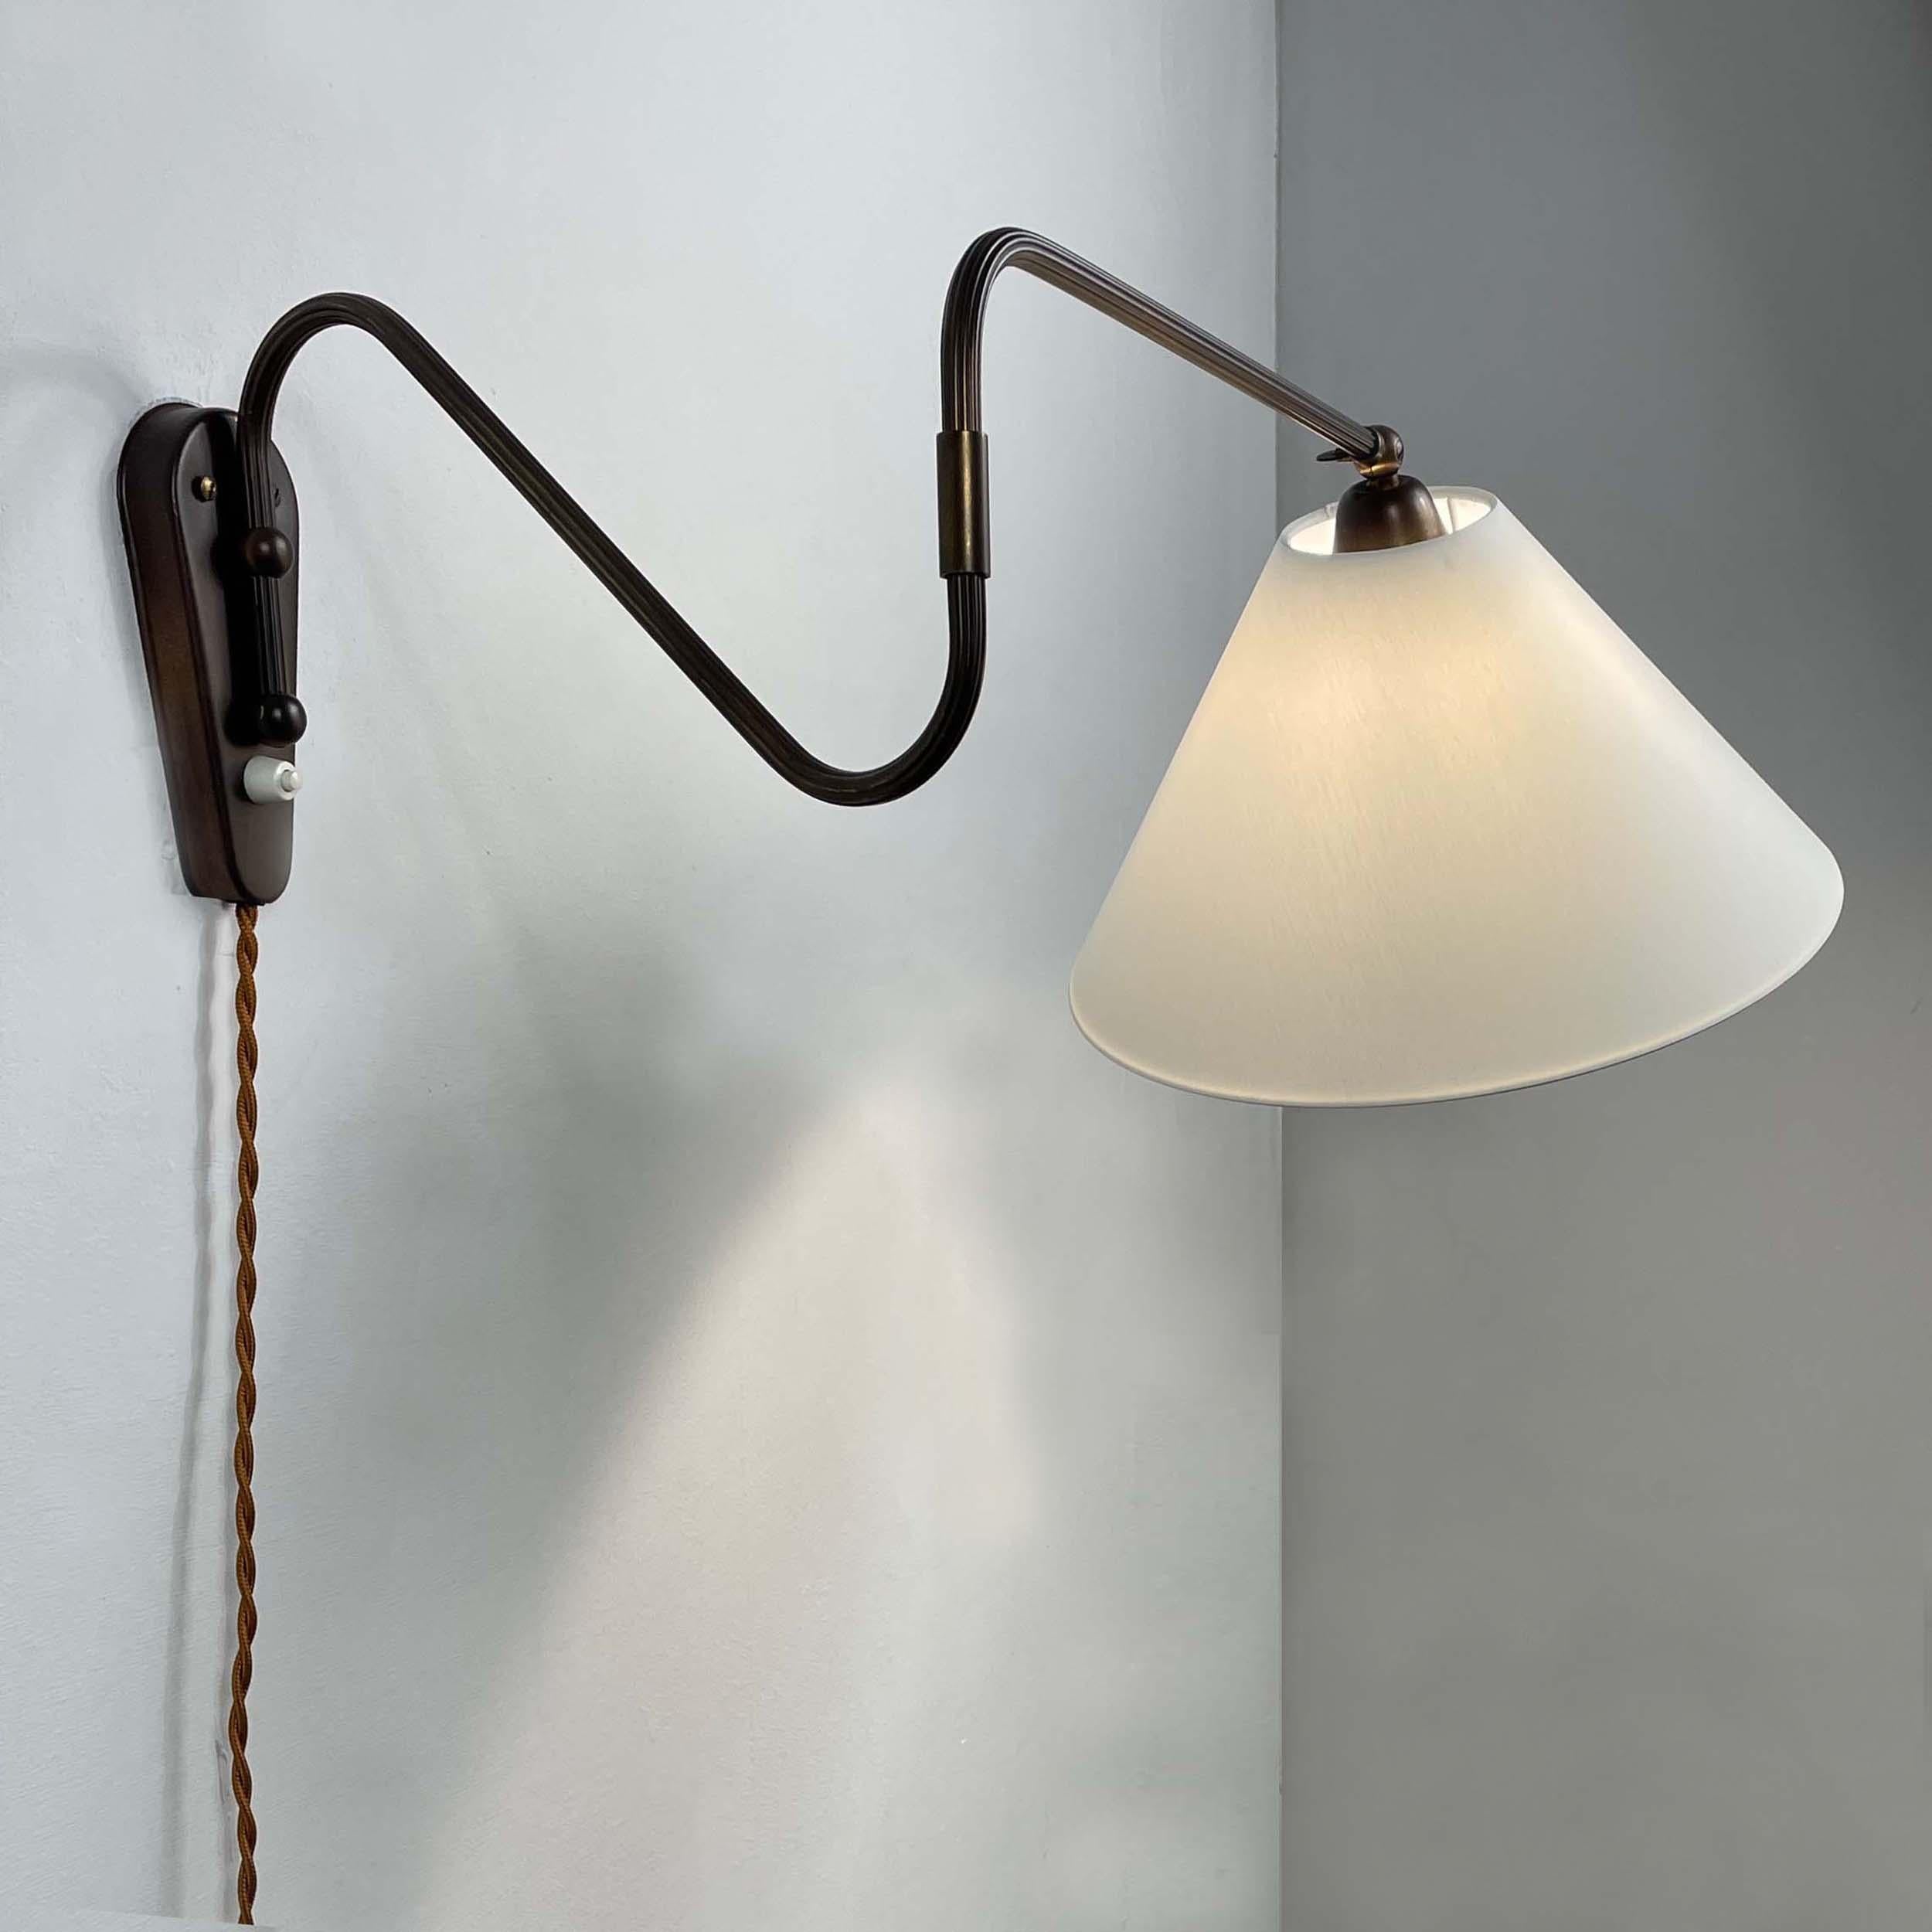 Bronzed Brass Articulating and Extendable Wall Light, Sweden 1950s For Sale 10